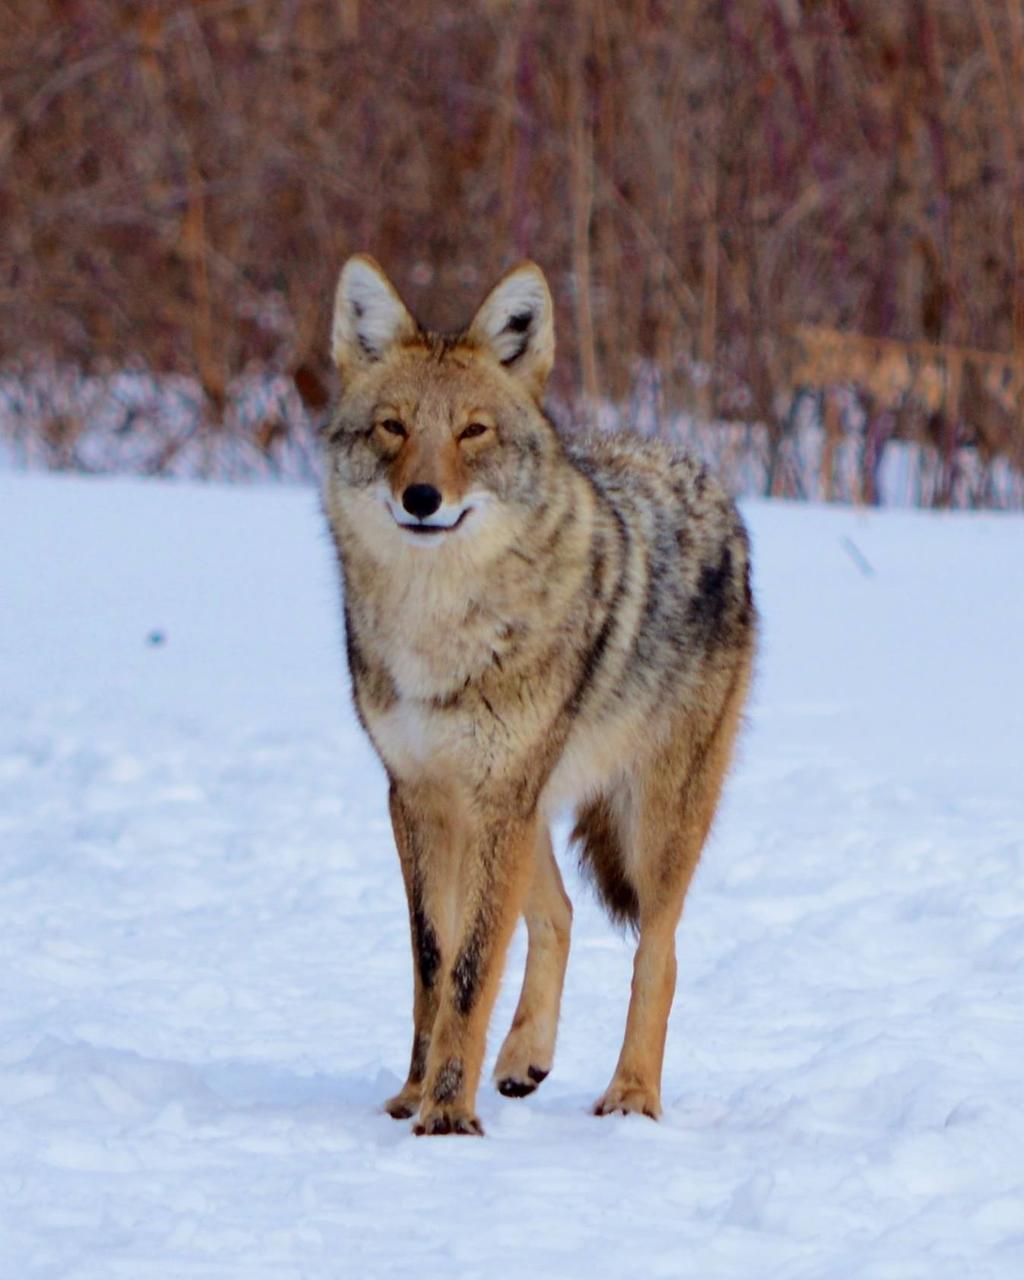 Response to Coyote/Human Interaction A s coyotes continue to adapt to the suburban environment and their populations continue to expand and increase, attacks on humans can be expected to occur and to